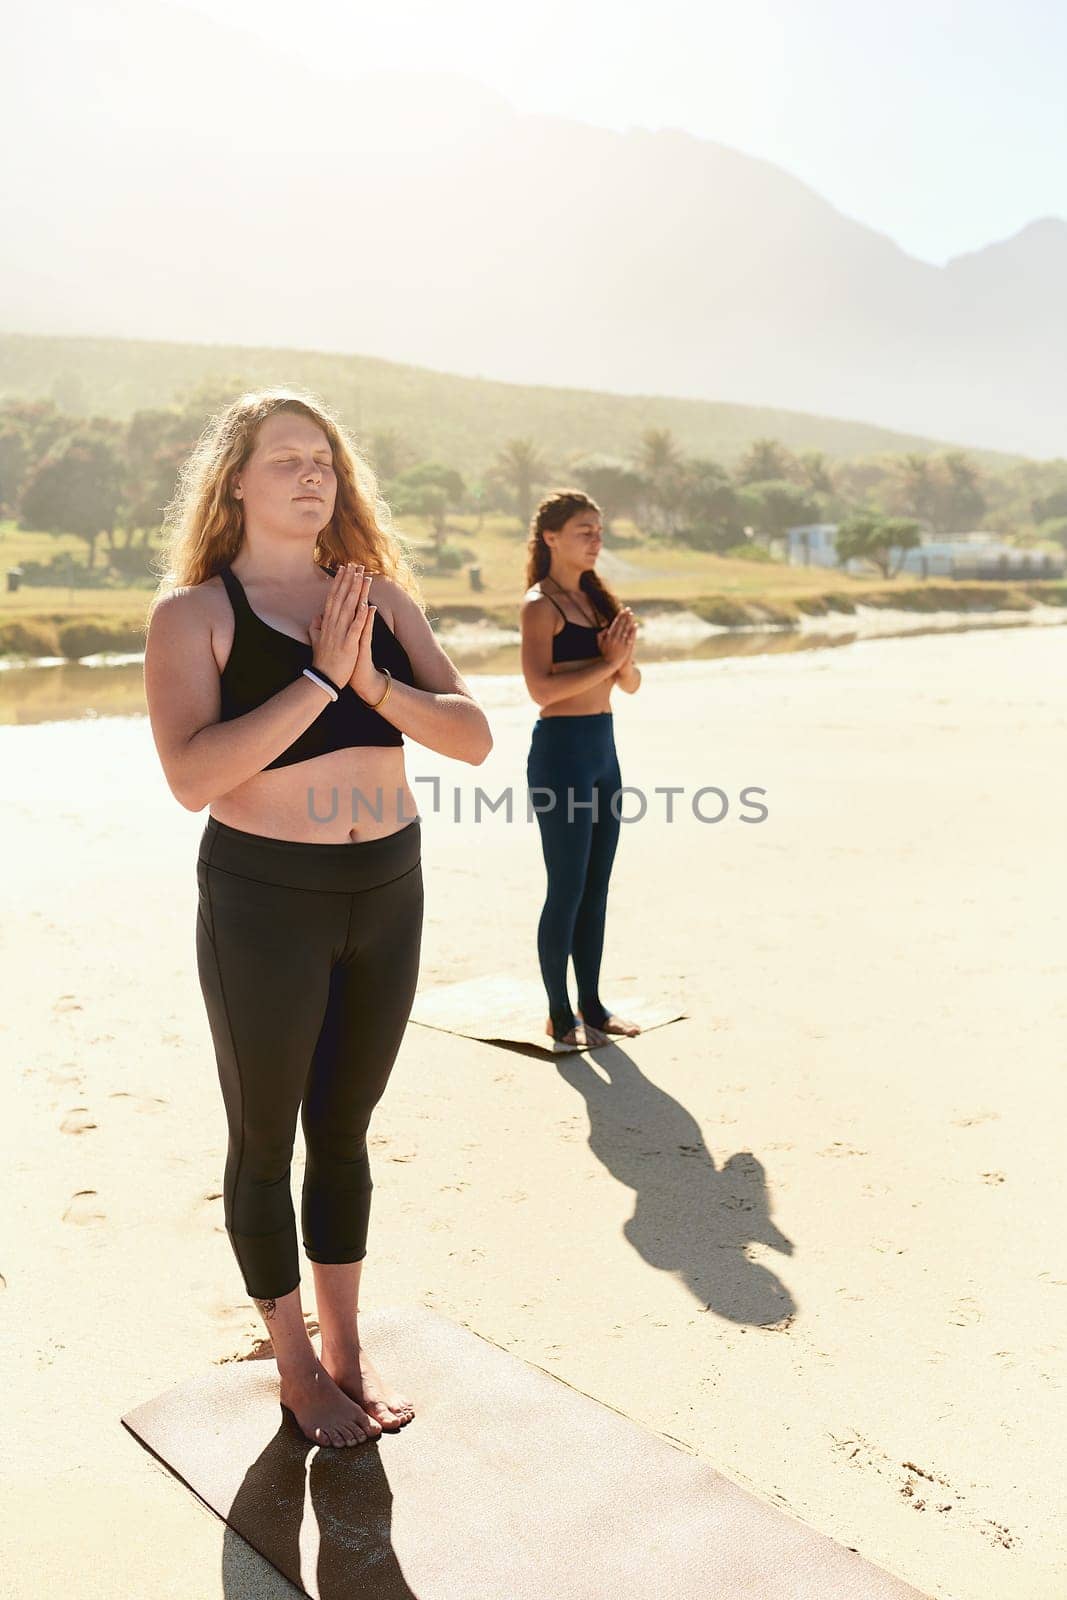 Yoga helps you maintain, recover or improve your health. two young women practising yoga on the beach